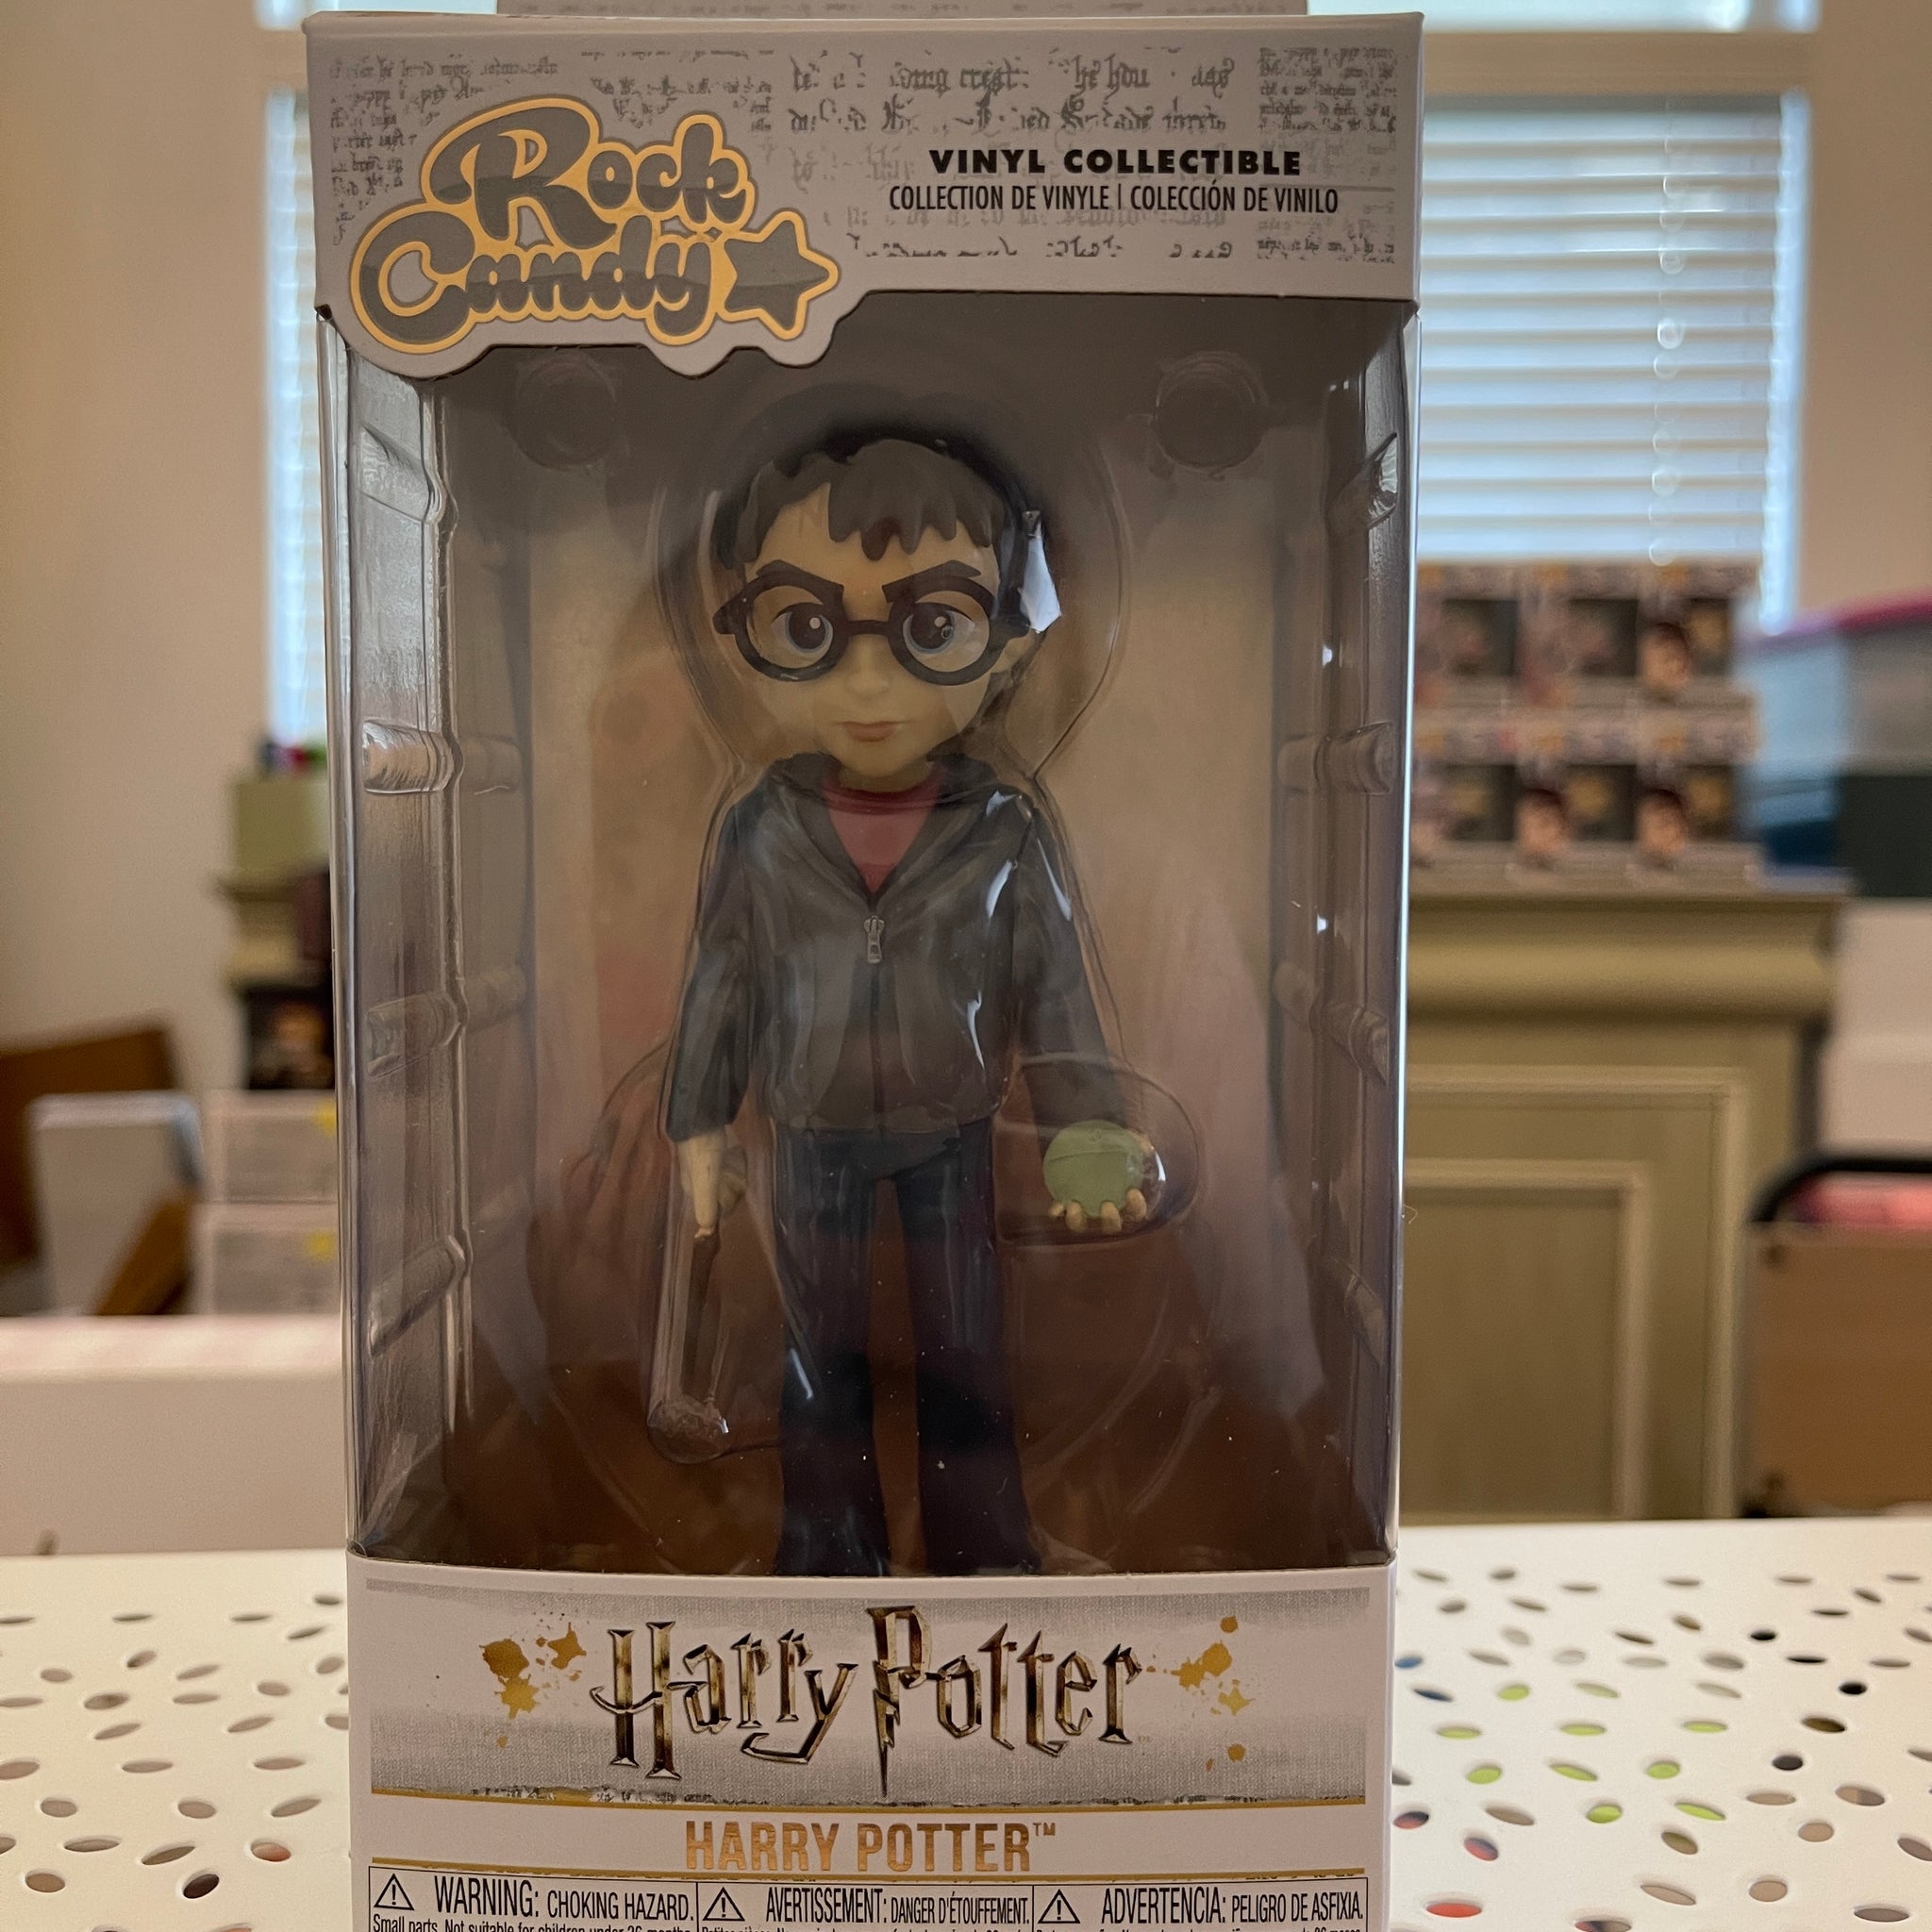 Funko POP! Harry Potter with Prophecy Figurine